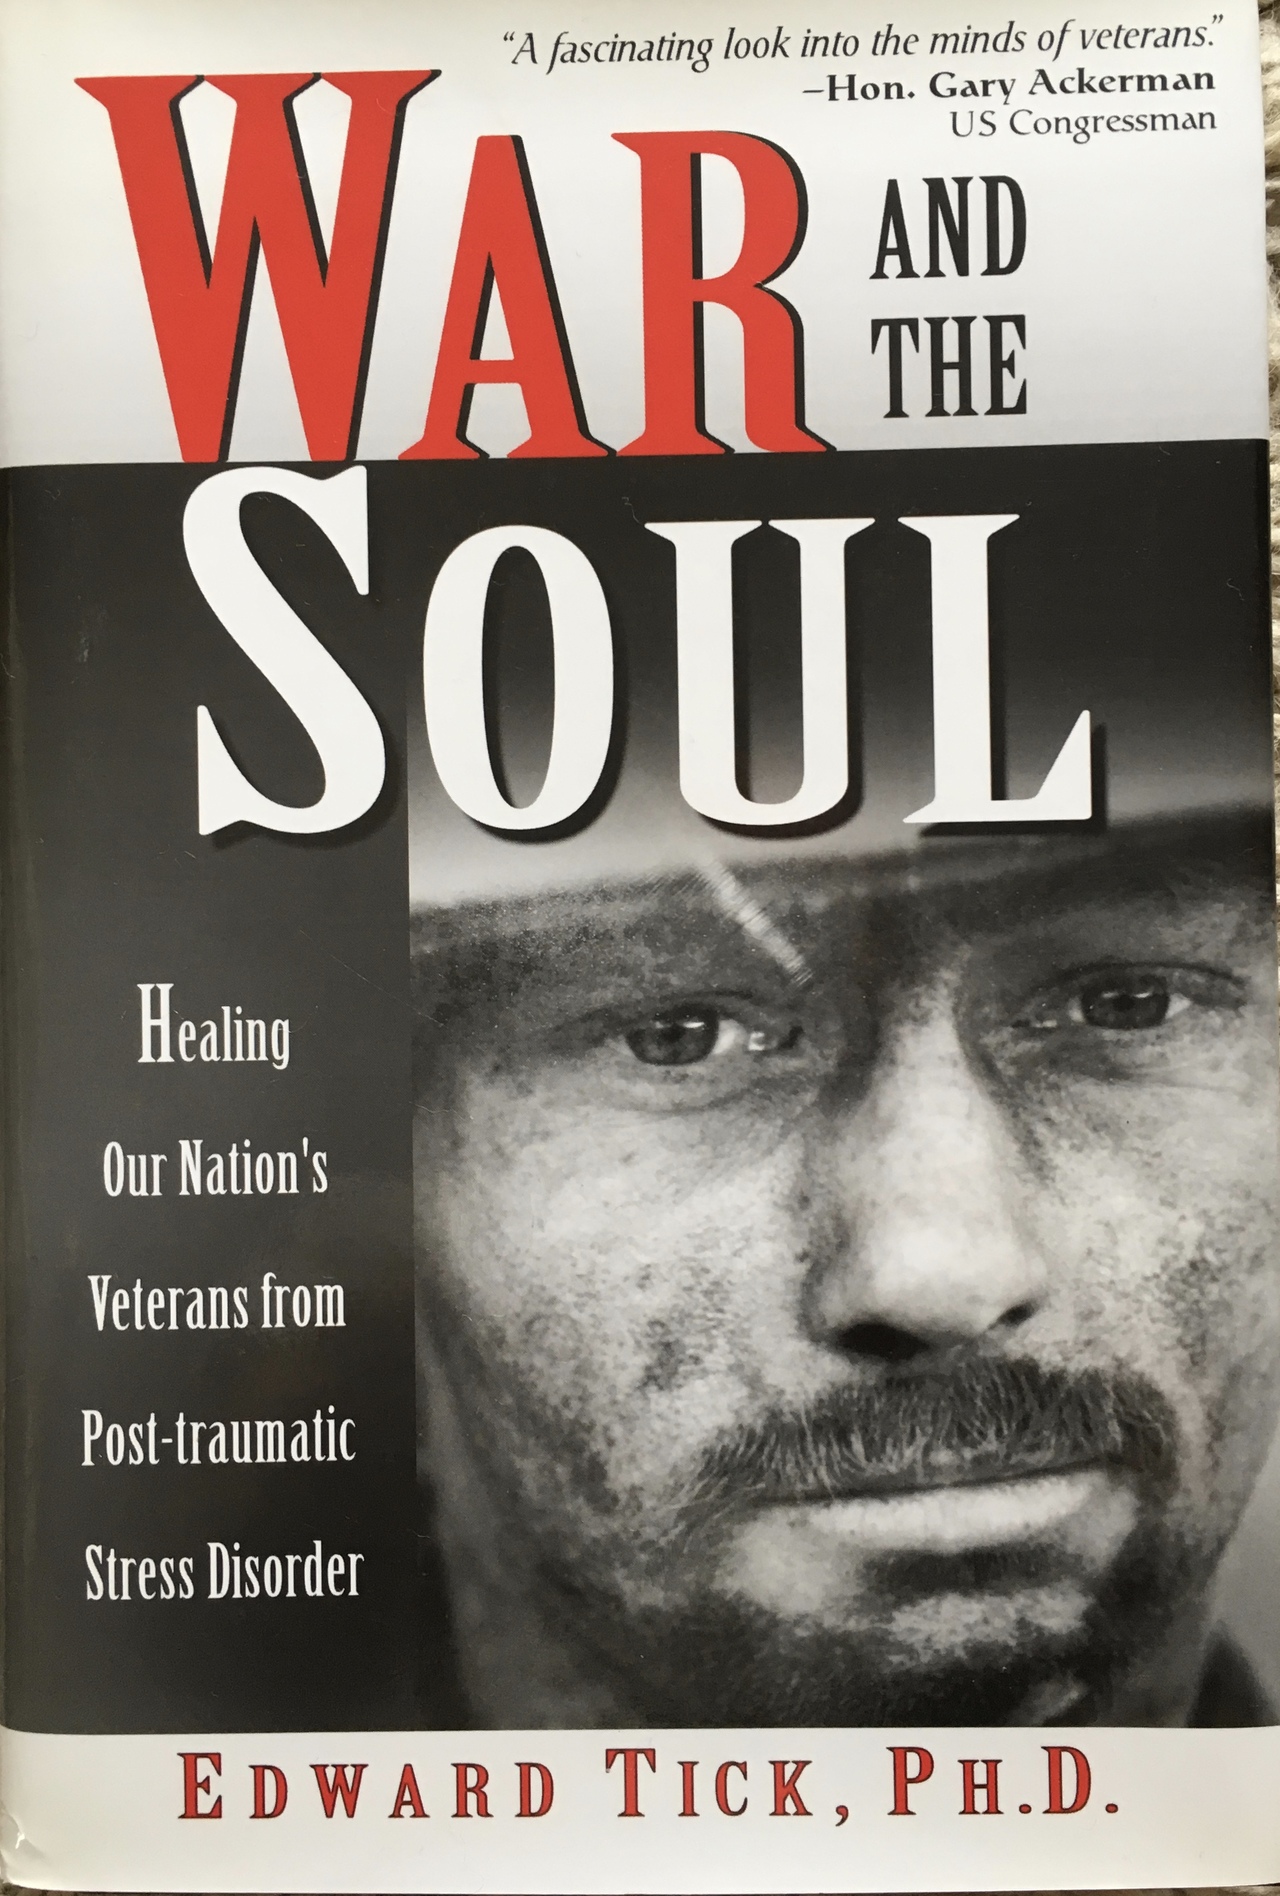 War and the Soul: Healing Our Nation’s Veterans from Post-traumatic Stress Disorder (Quest Books, 2005)